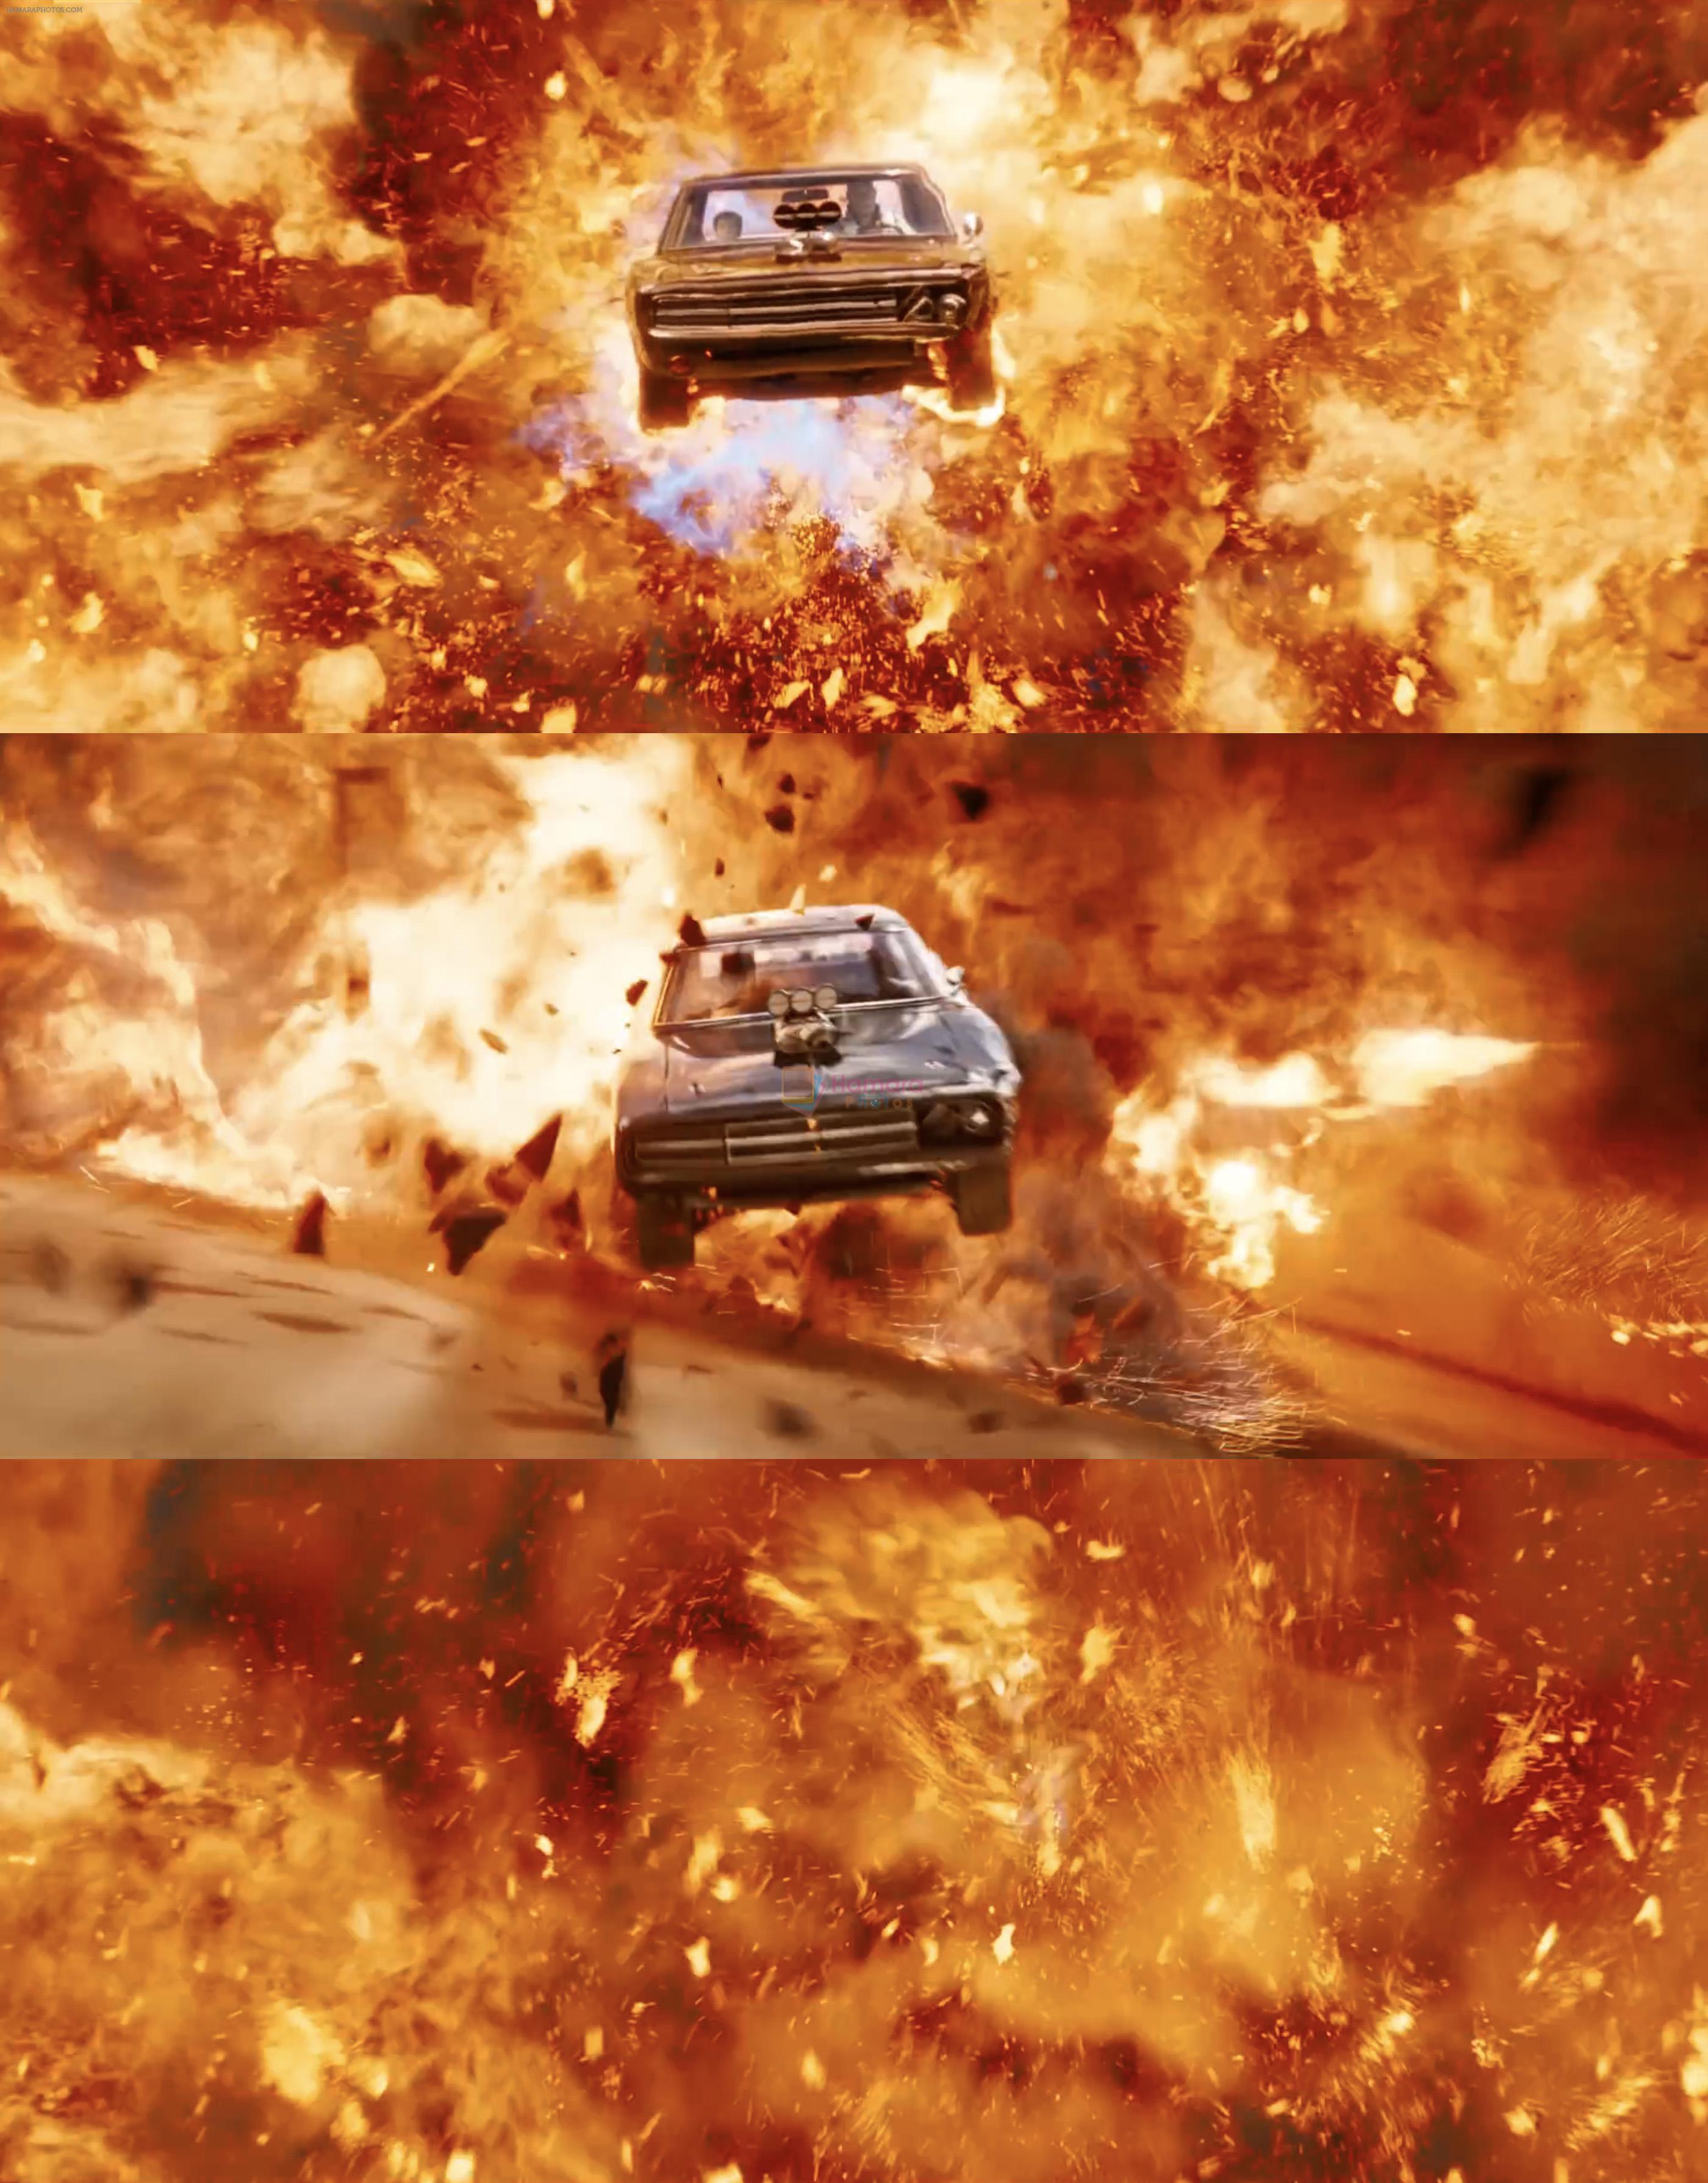 Action scenes in Still from movie Fast X